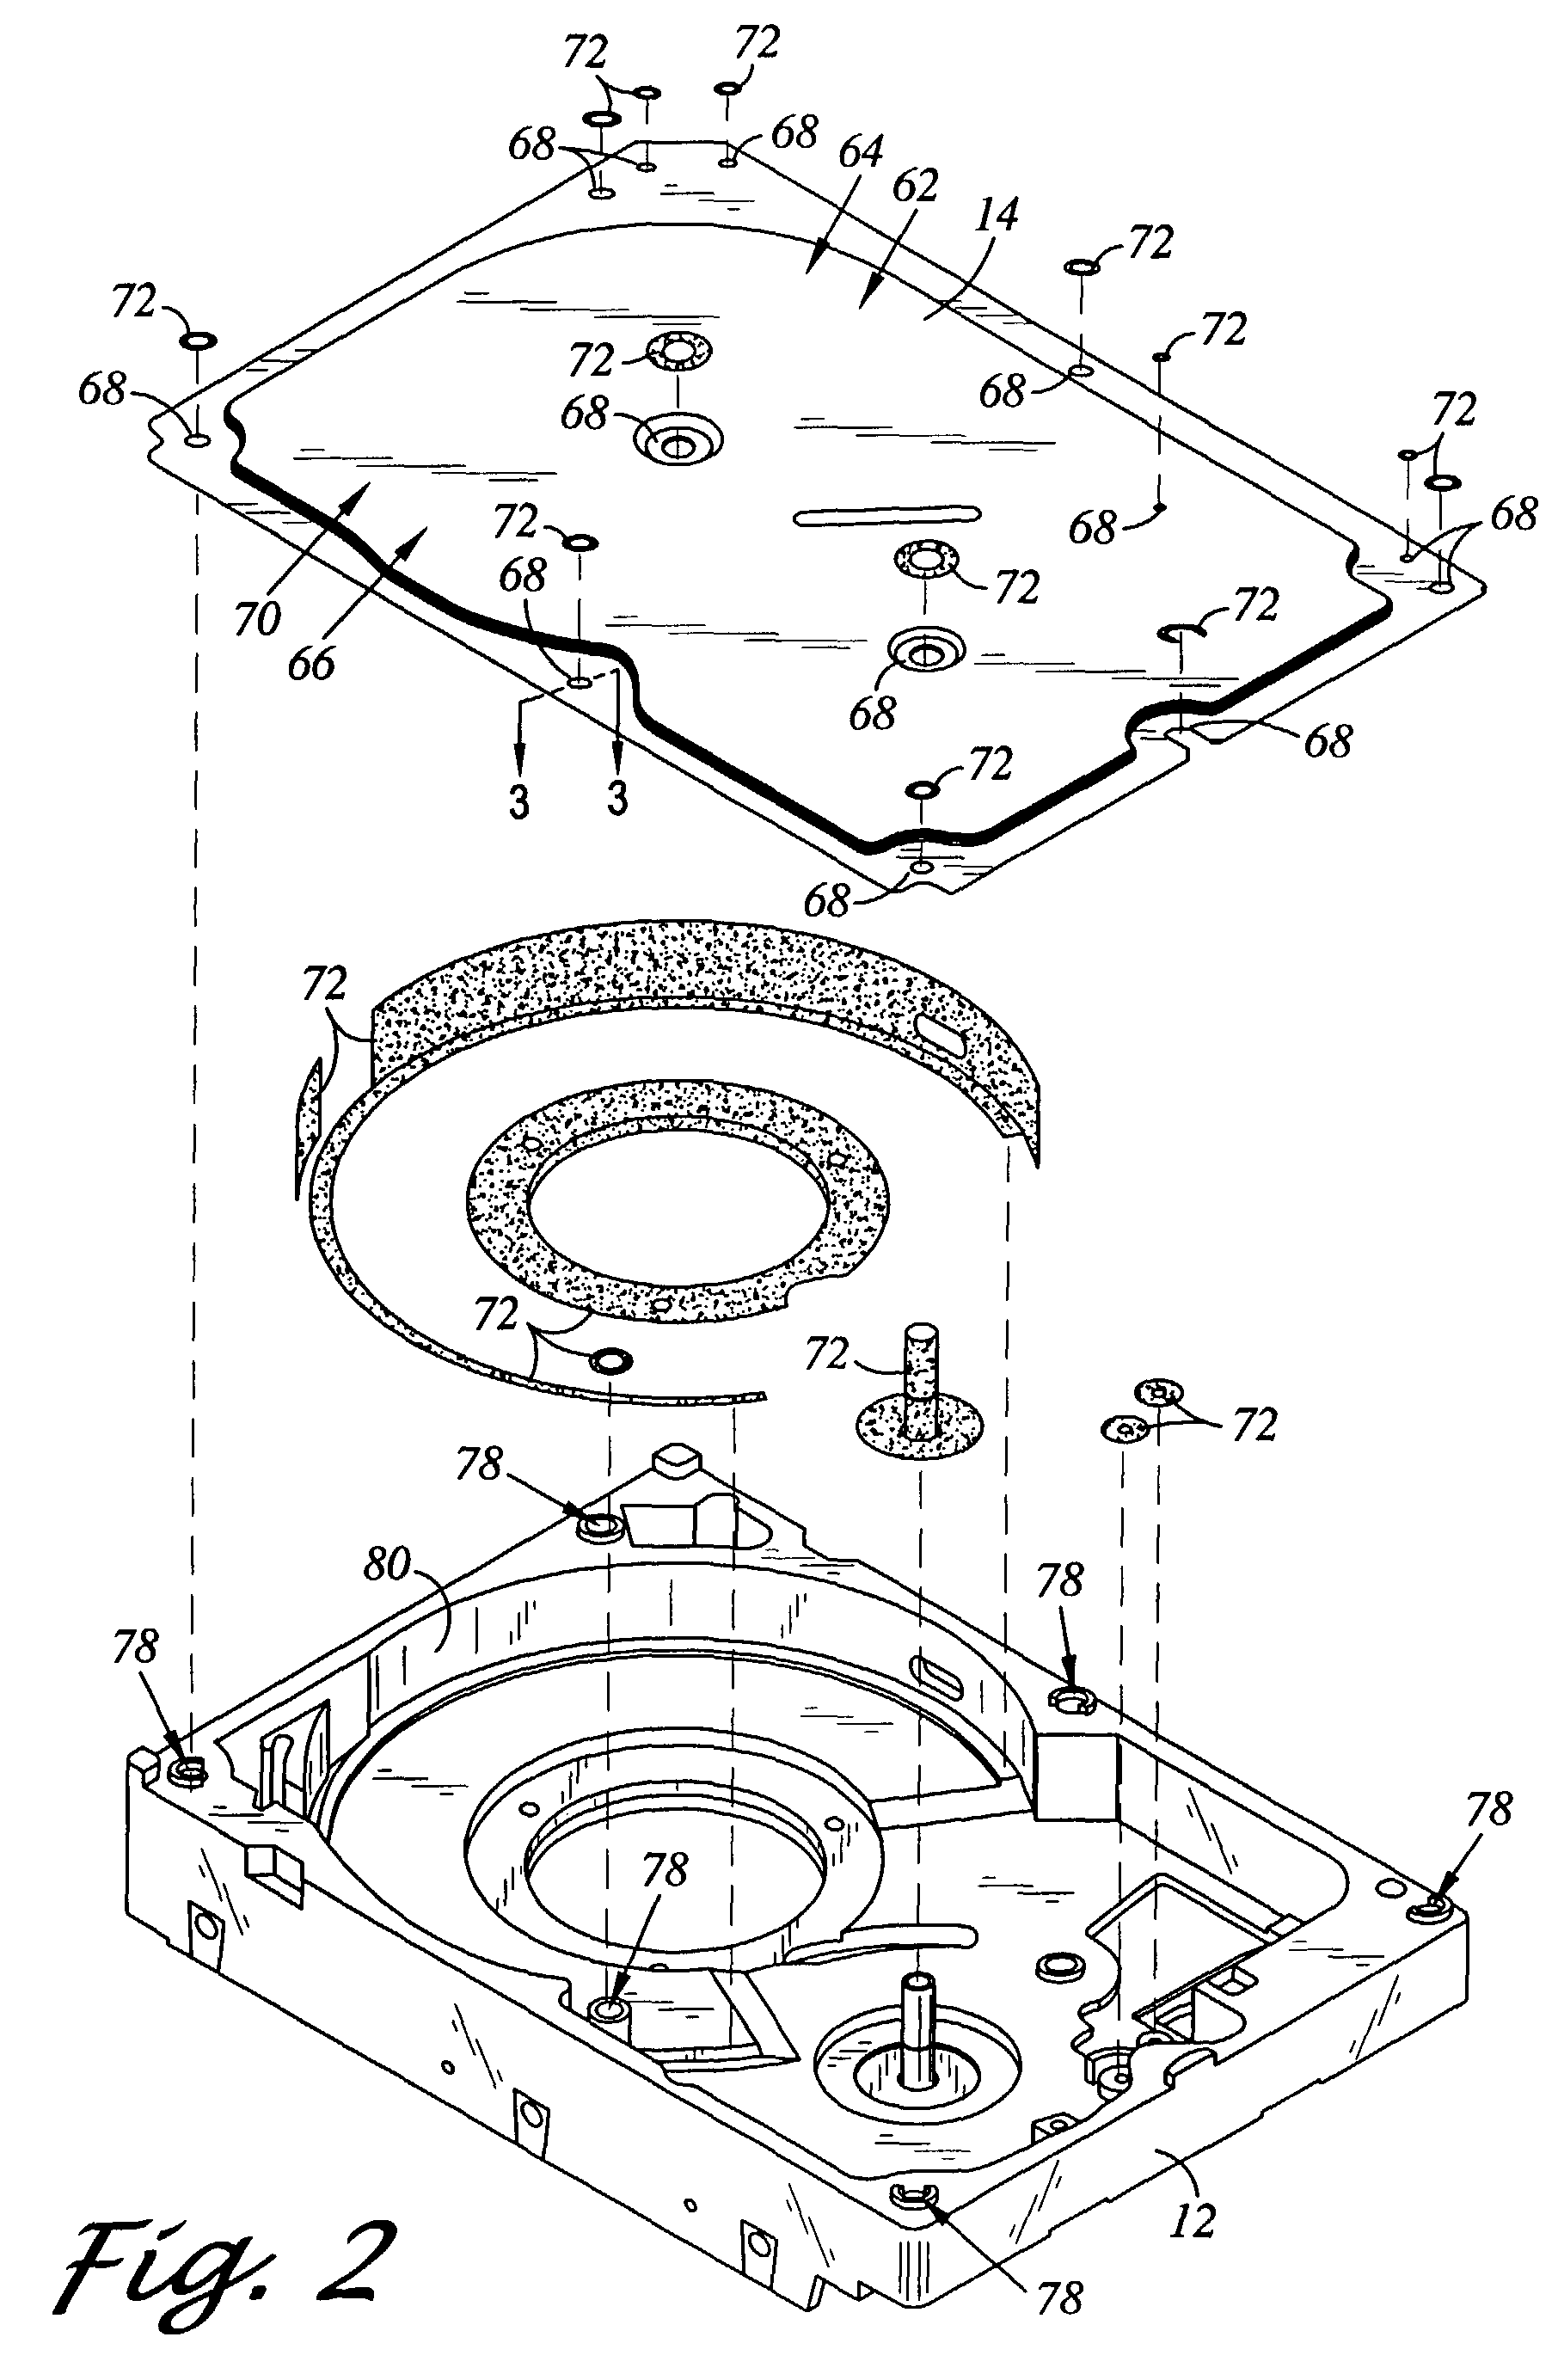 Disk drive housing member including an electrically insulative coating and metallic platings and method of manufacturing the same